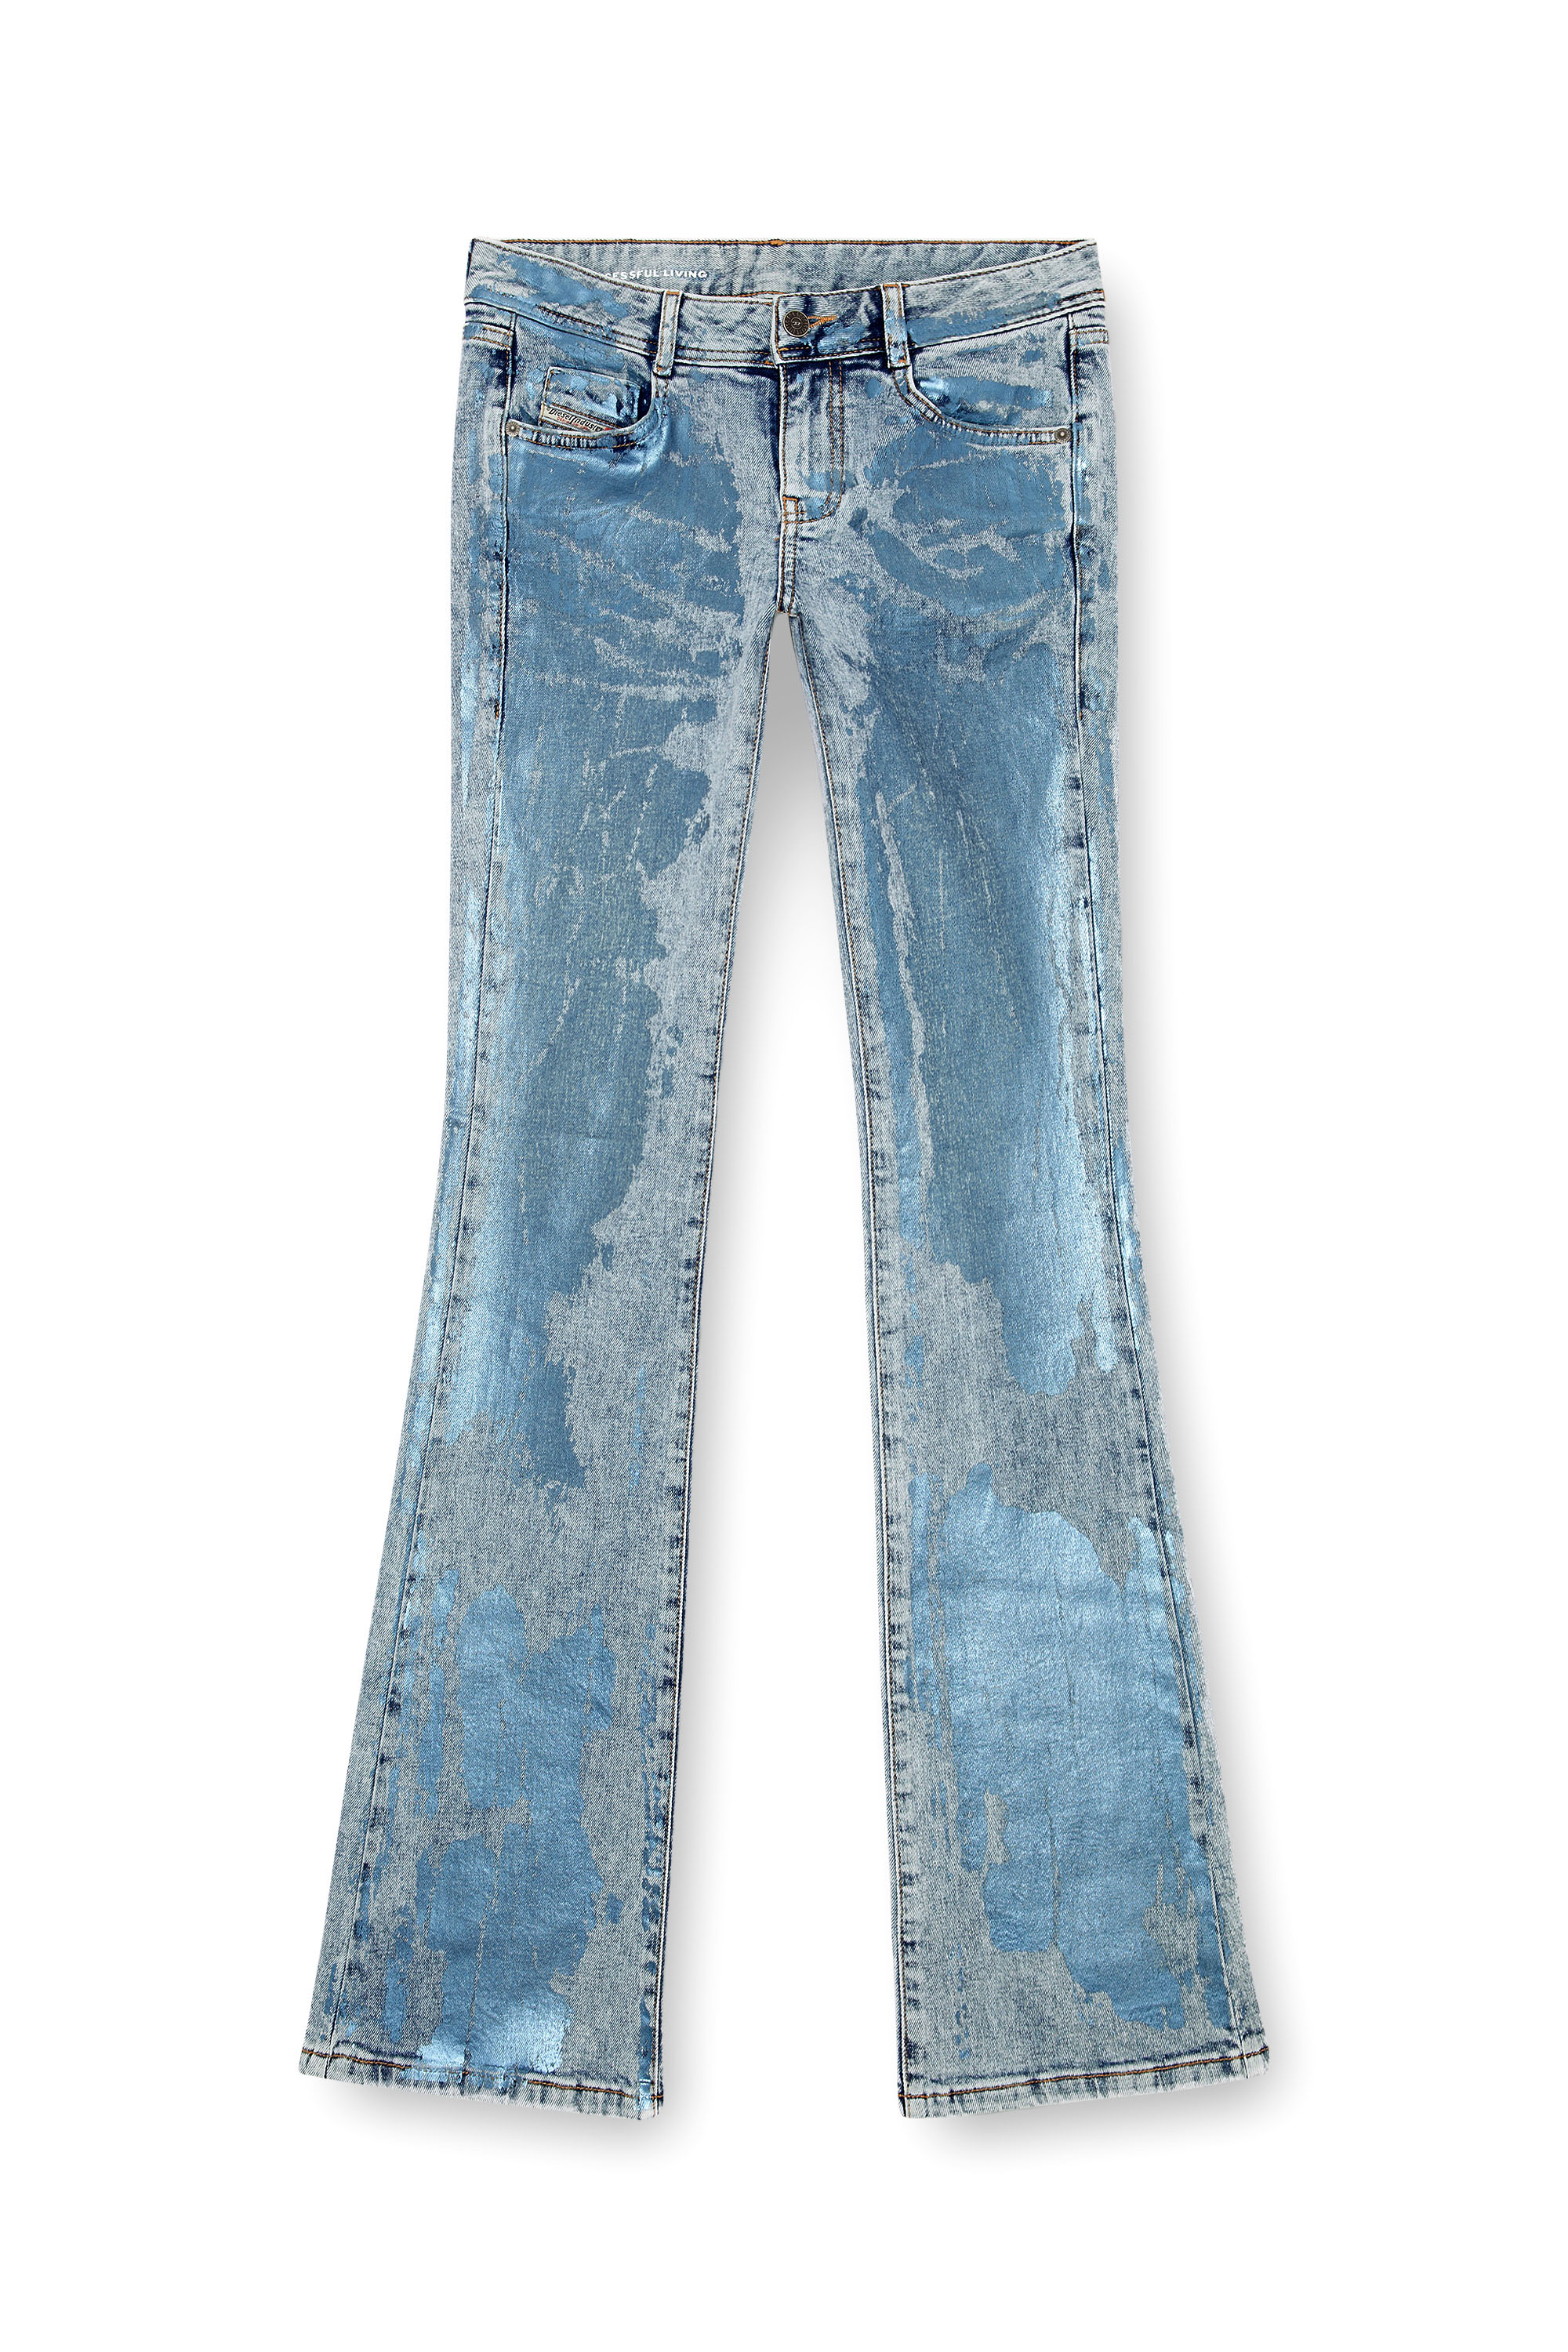 Diesel - Bootcut and Flare Jeans 1969 D-Ebbey 0AJEU, Mujer Bootcut y Flare Jeans - 1969 D-Ebbey in Azul marino - Image 3